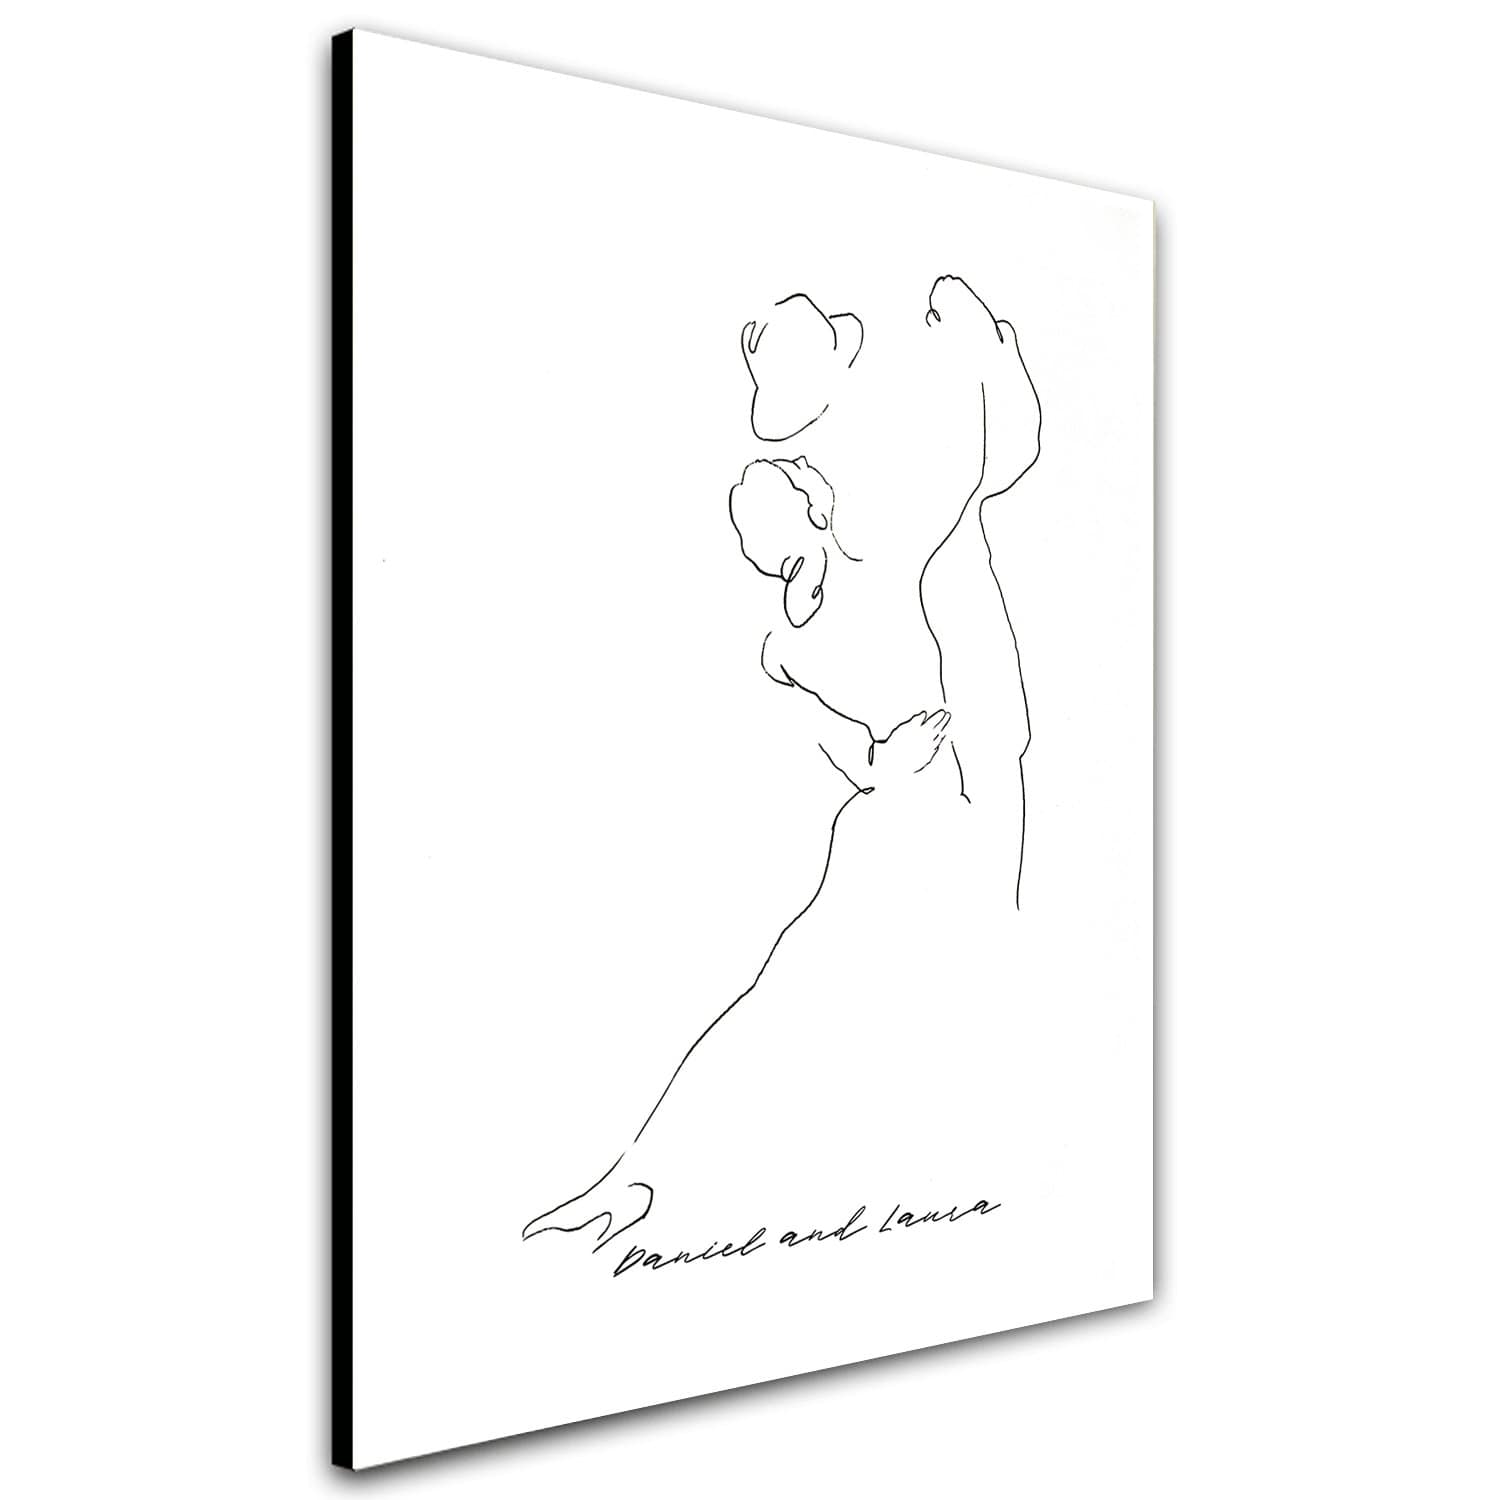 The Dance Contemporary Line Drawing Art & Romantic Personalized Gift for a Couple